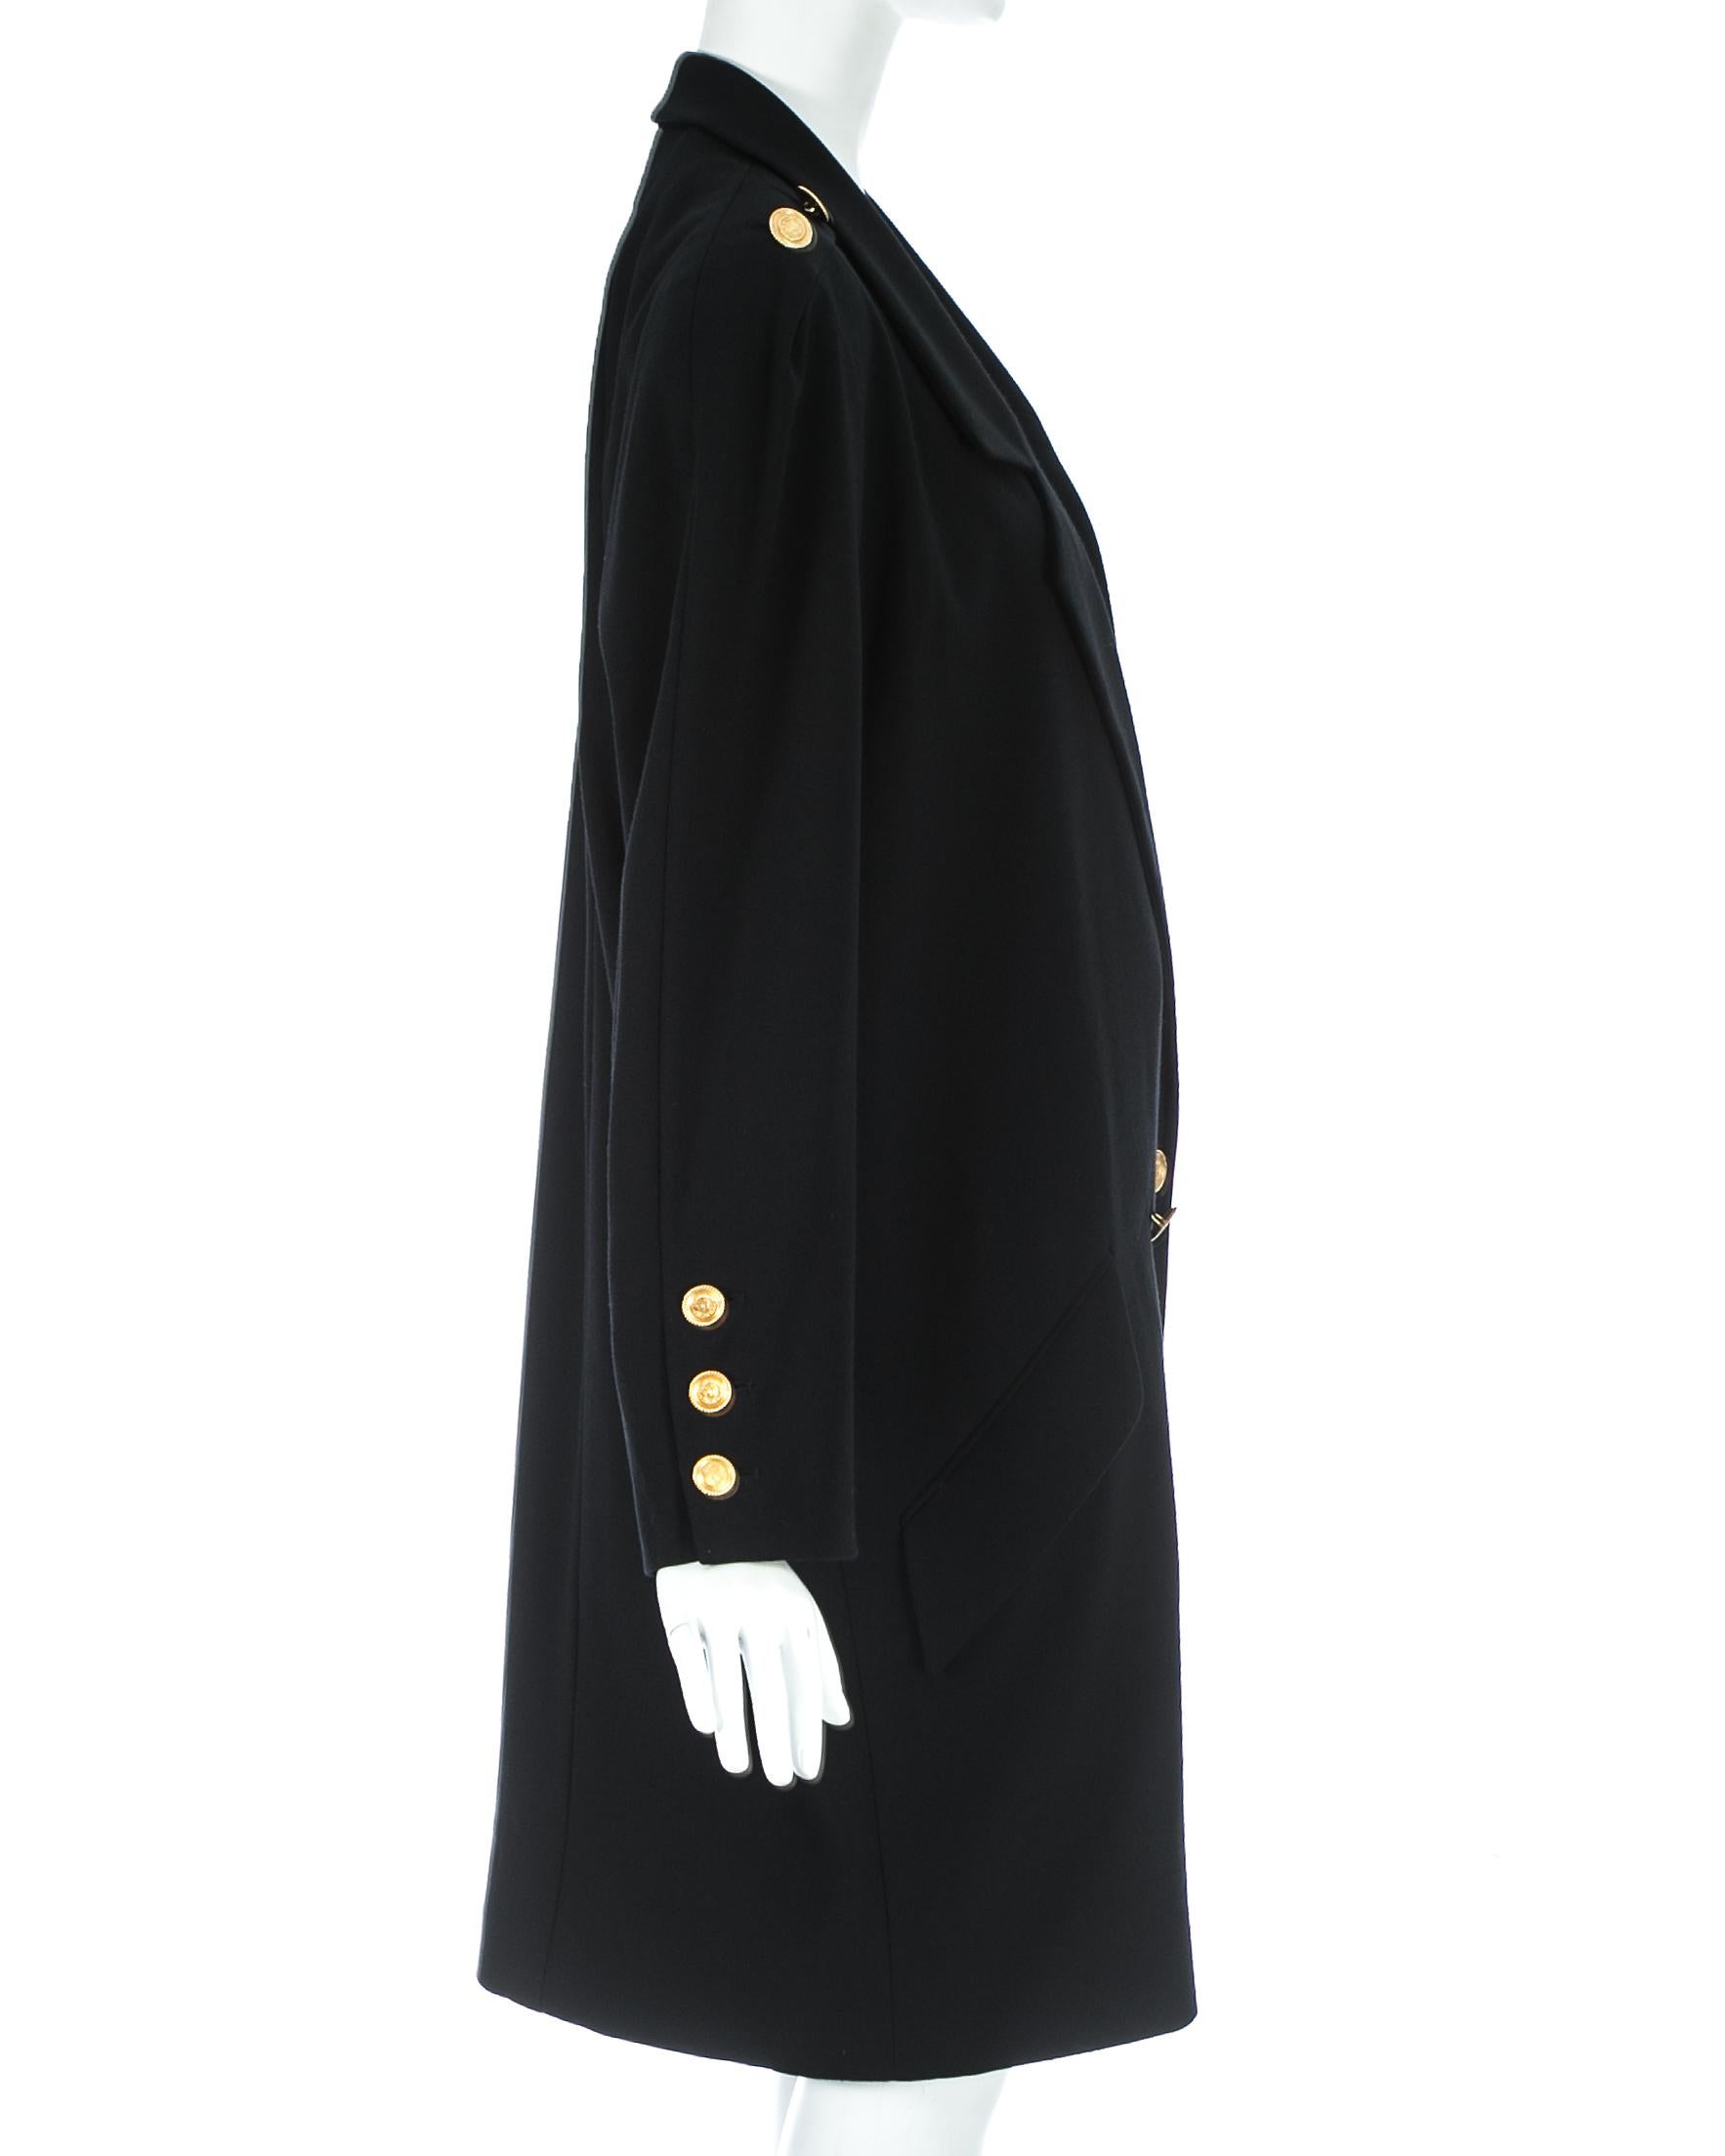 Chanel by Karl Lagerfeld black wool oversized coat dress, c. 1980s at ...